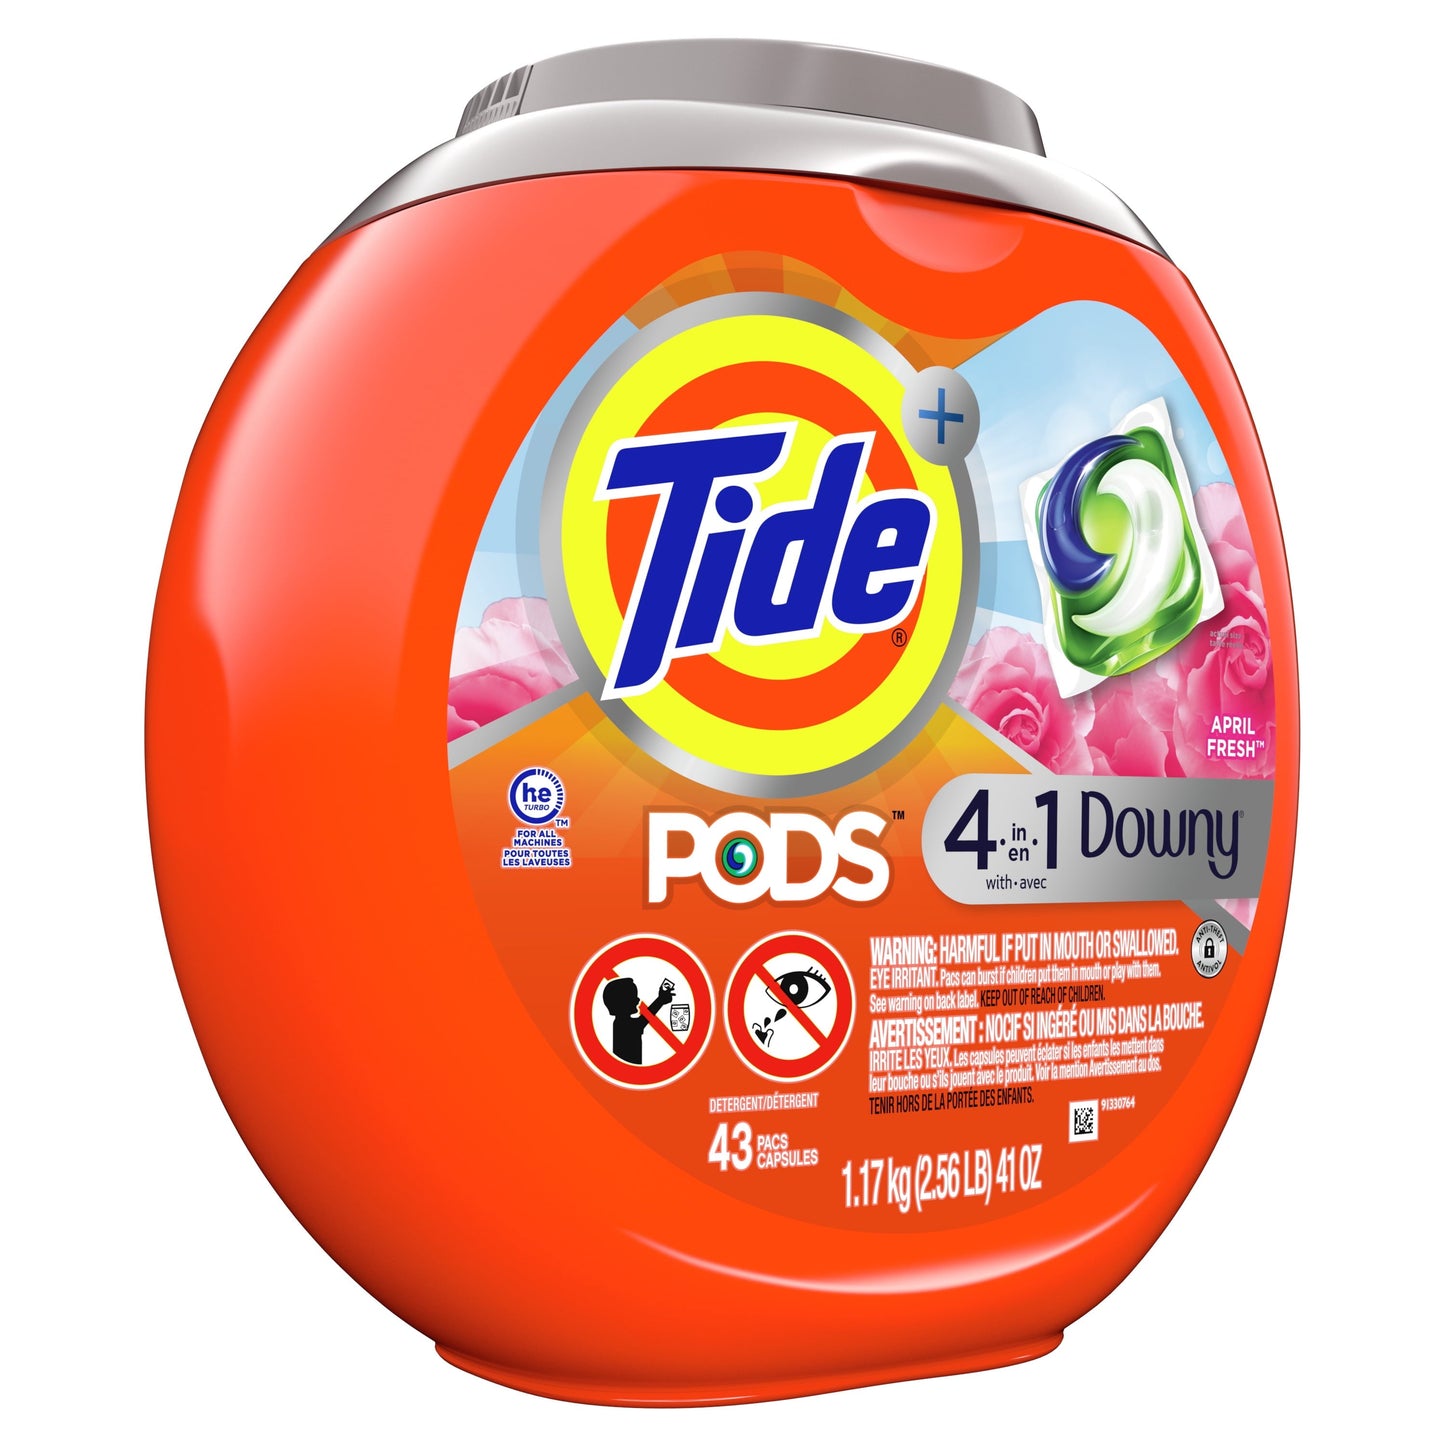 Pods with Downy 4 in 1 Laundry Detergent, 43 Count